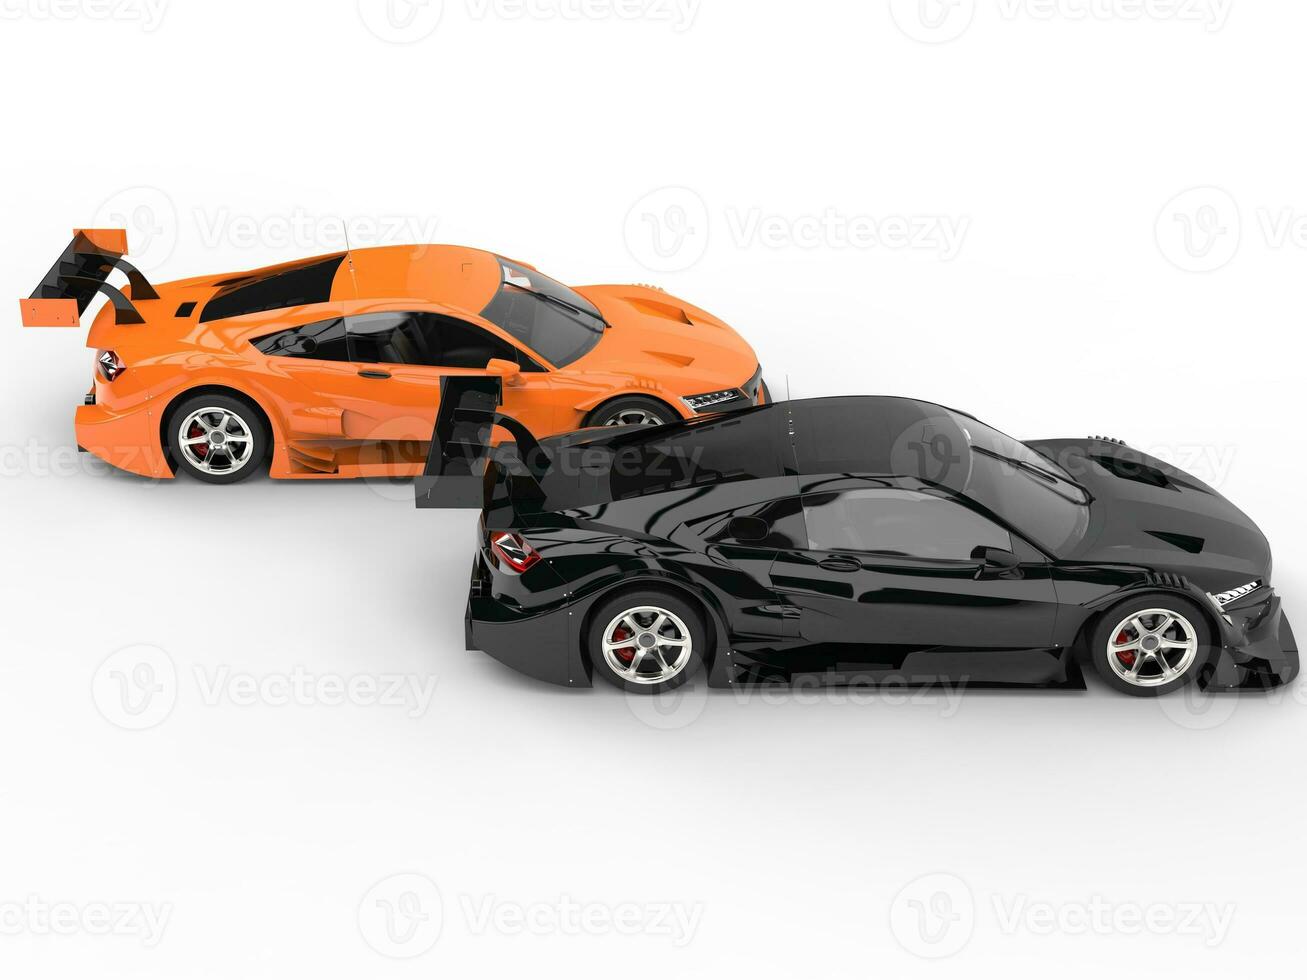 Black and orange awesome concept sports cars photo